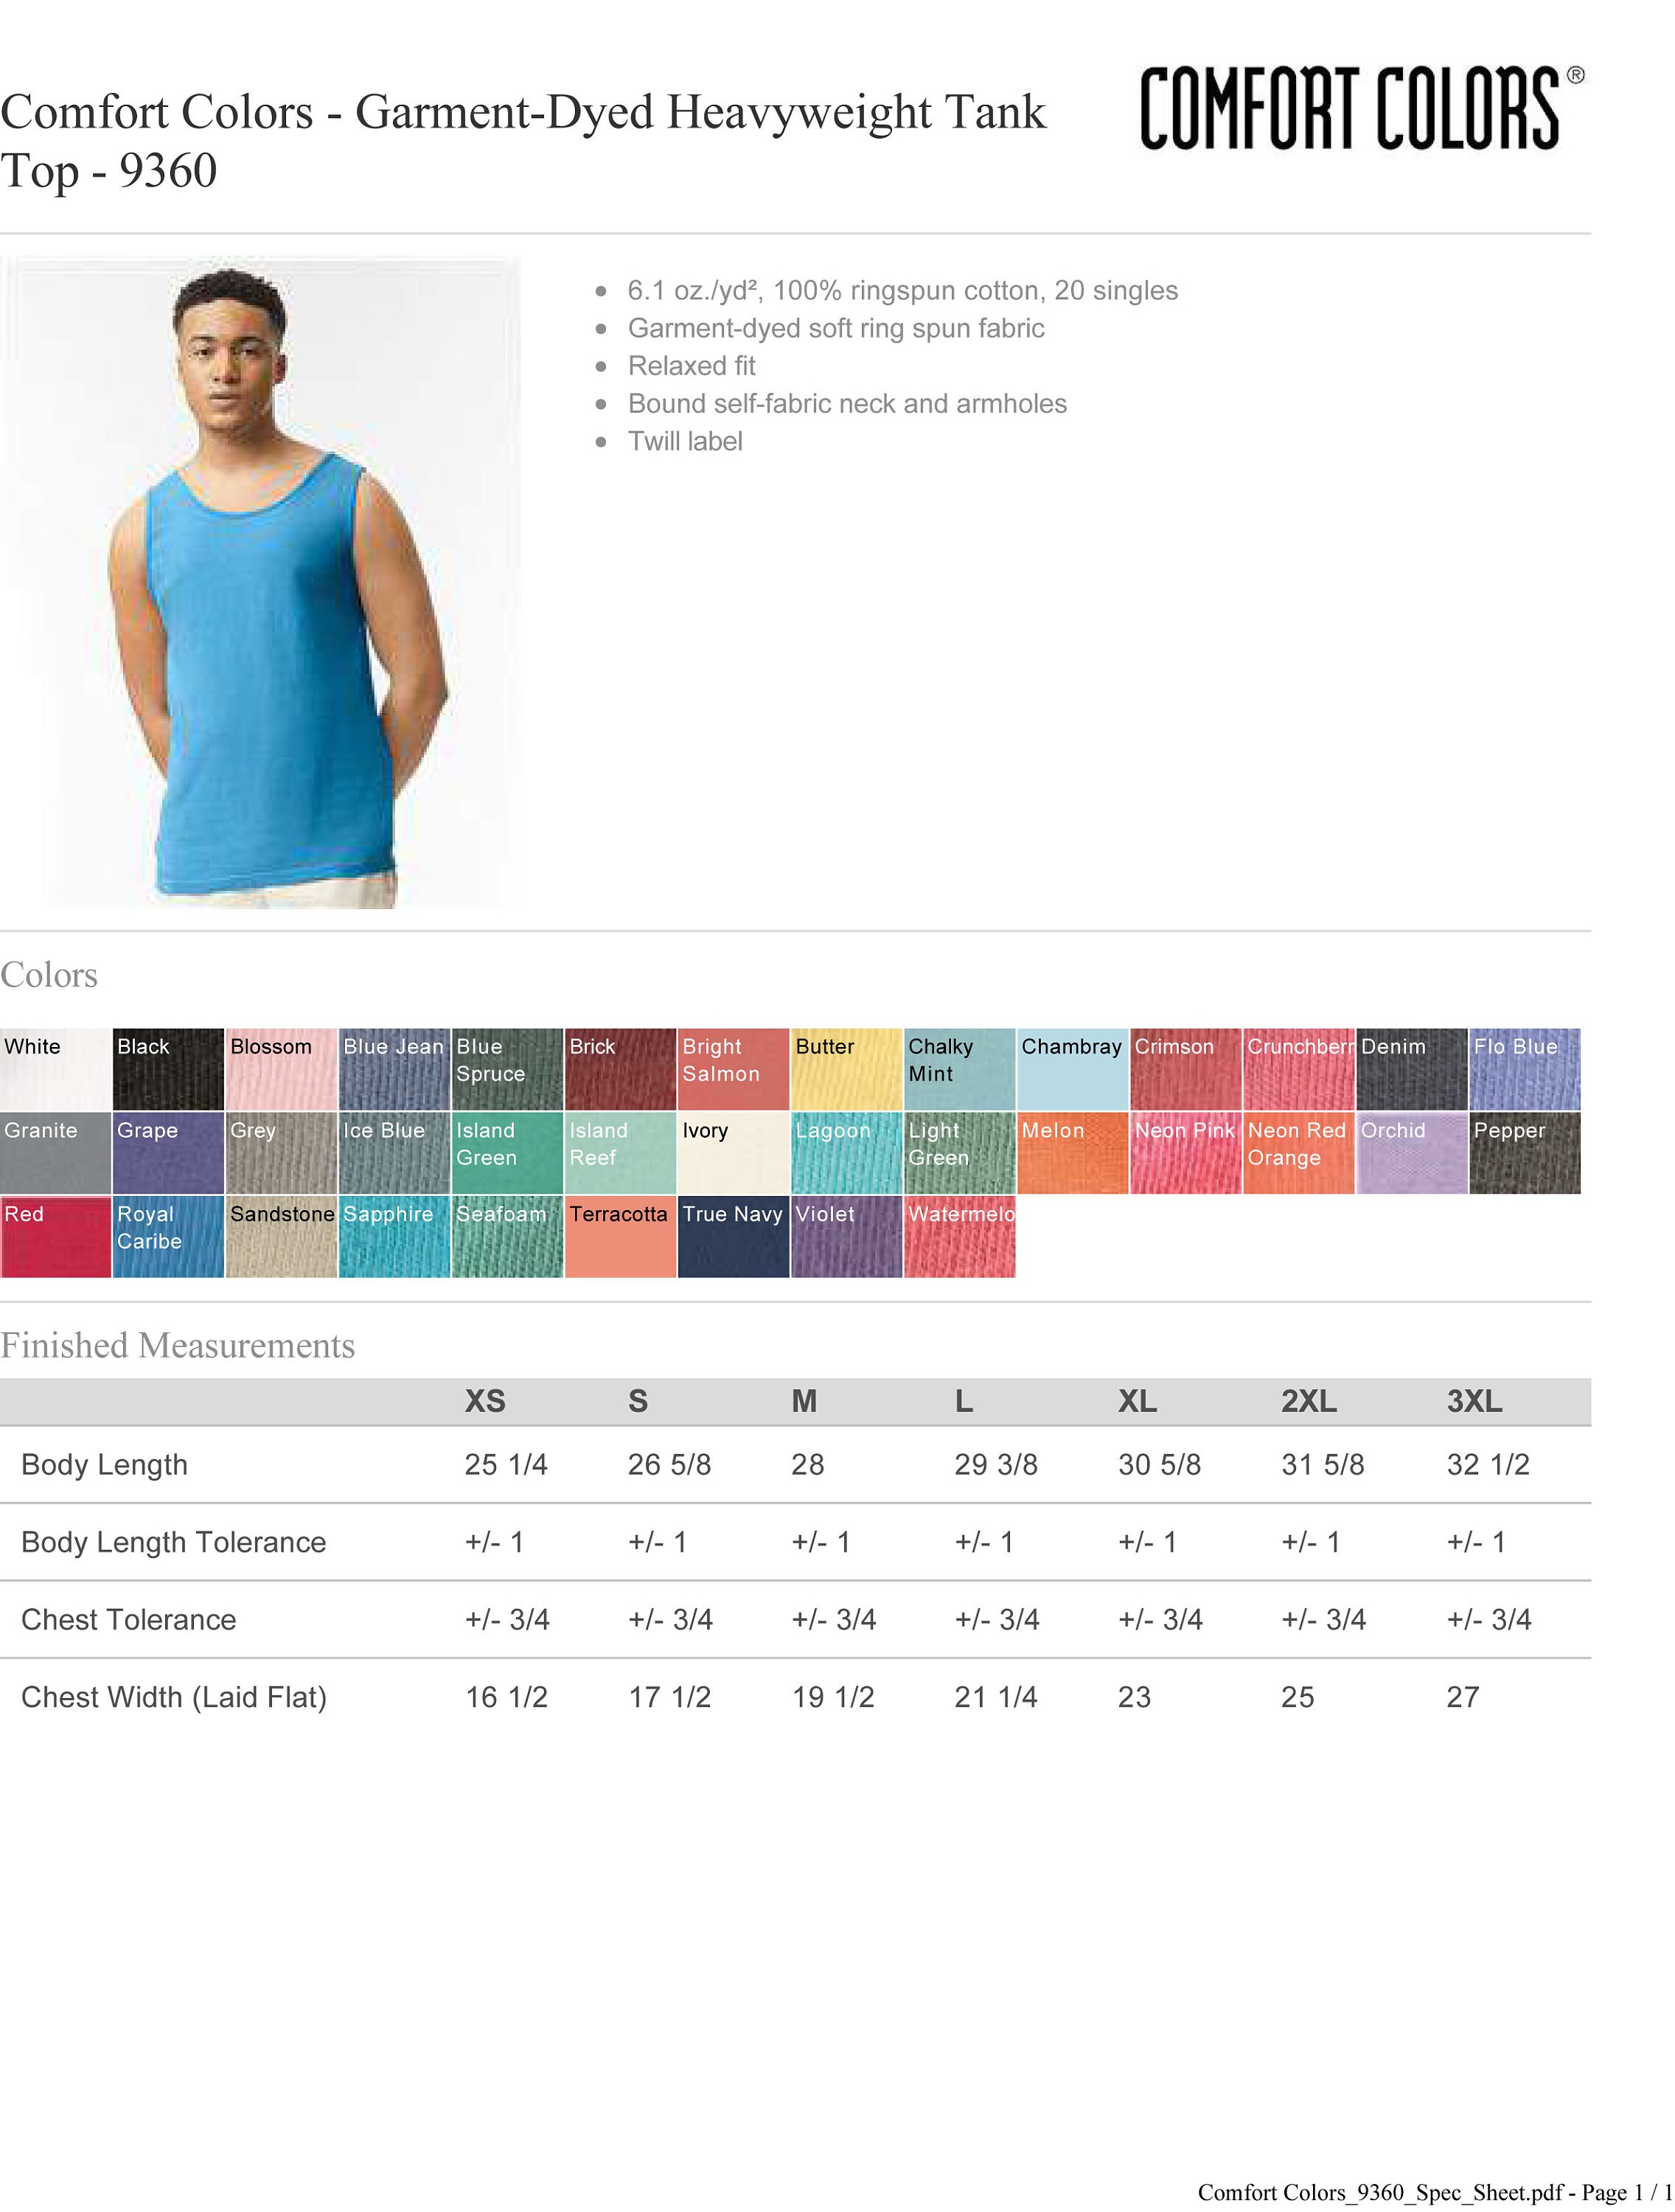 Comfort Colors Men's Adult Tank Top, Style 9360 (X-Small, Neon